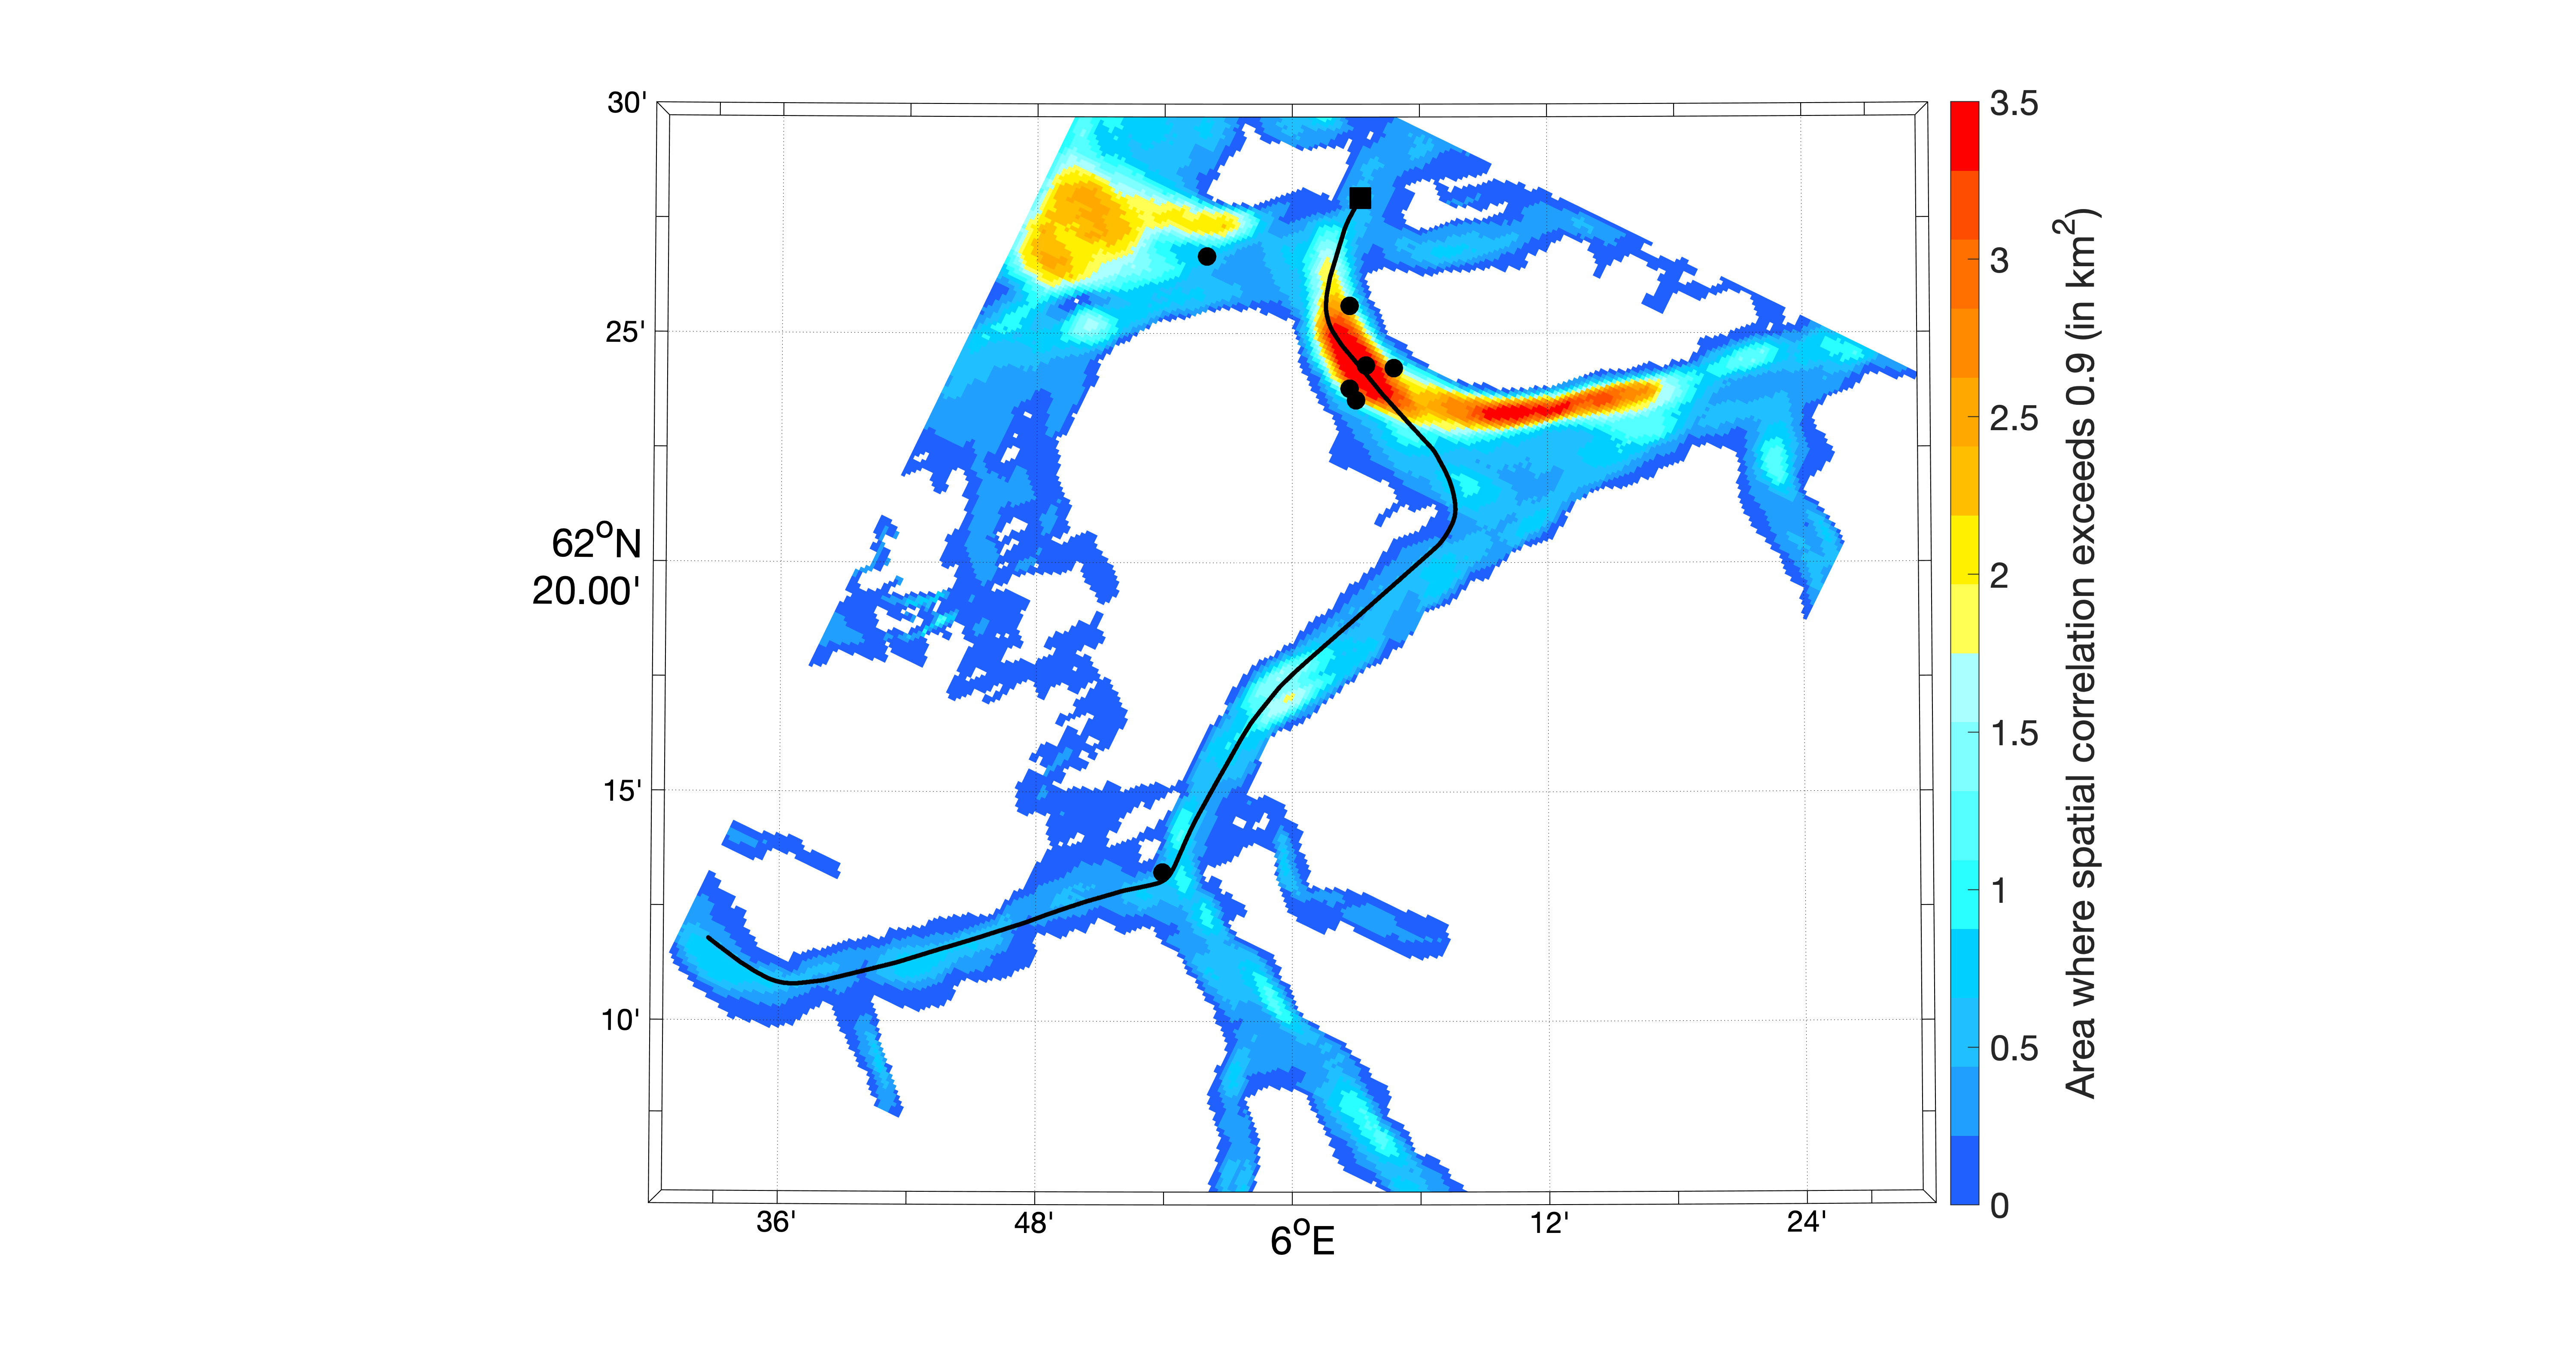 fig17_high-spatial-correlation-area_A160_map-with-shiptrack.png